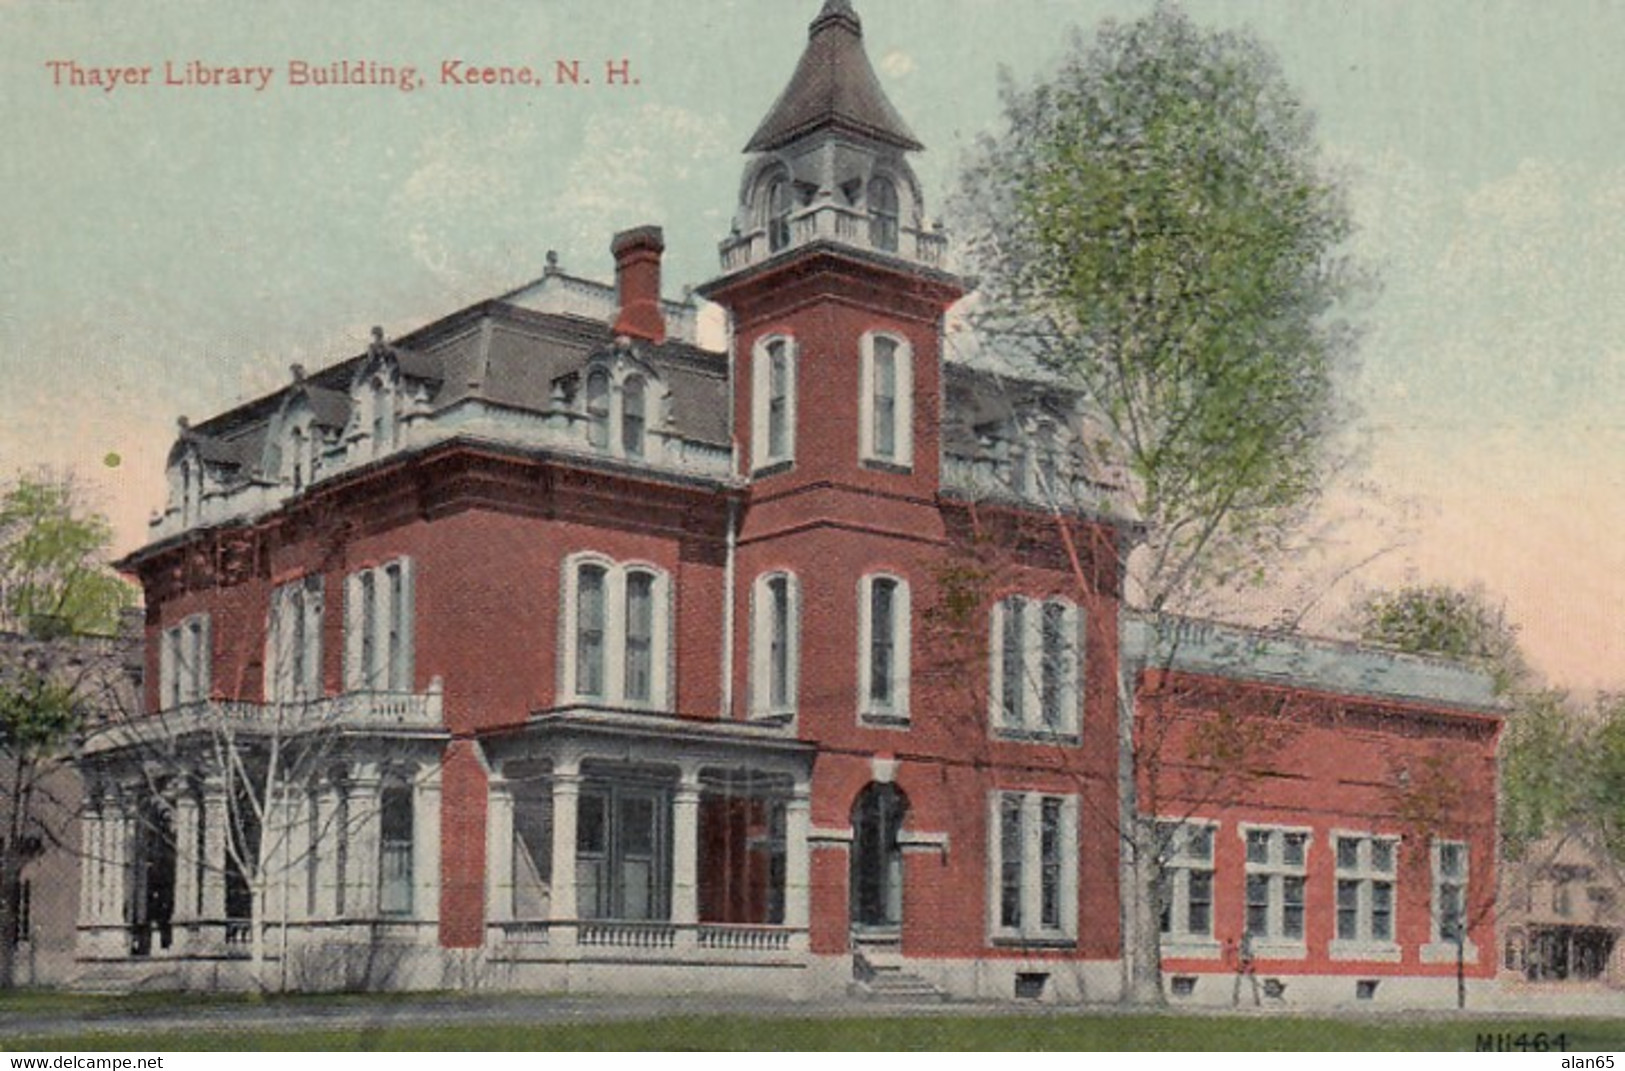 Keene New Hampshire, Thayer Library Building Architecture, C1900s/10s Vintage Postcard - Libraries